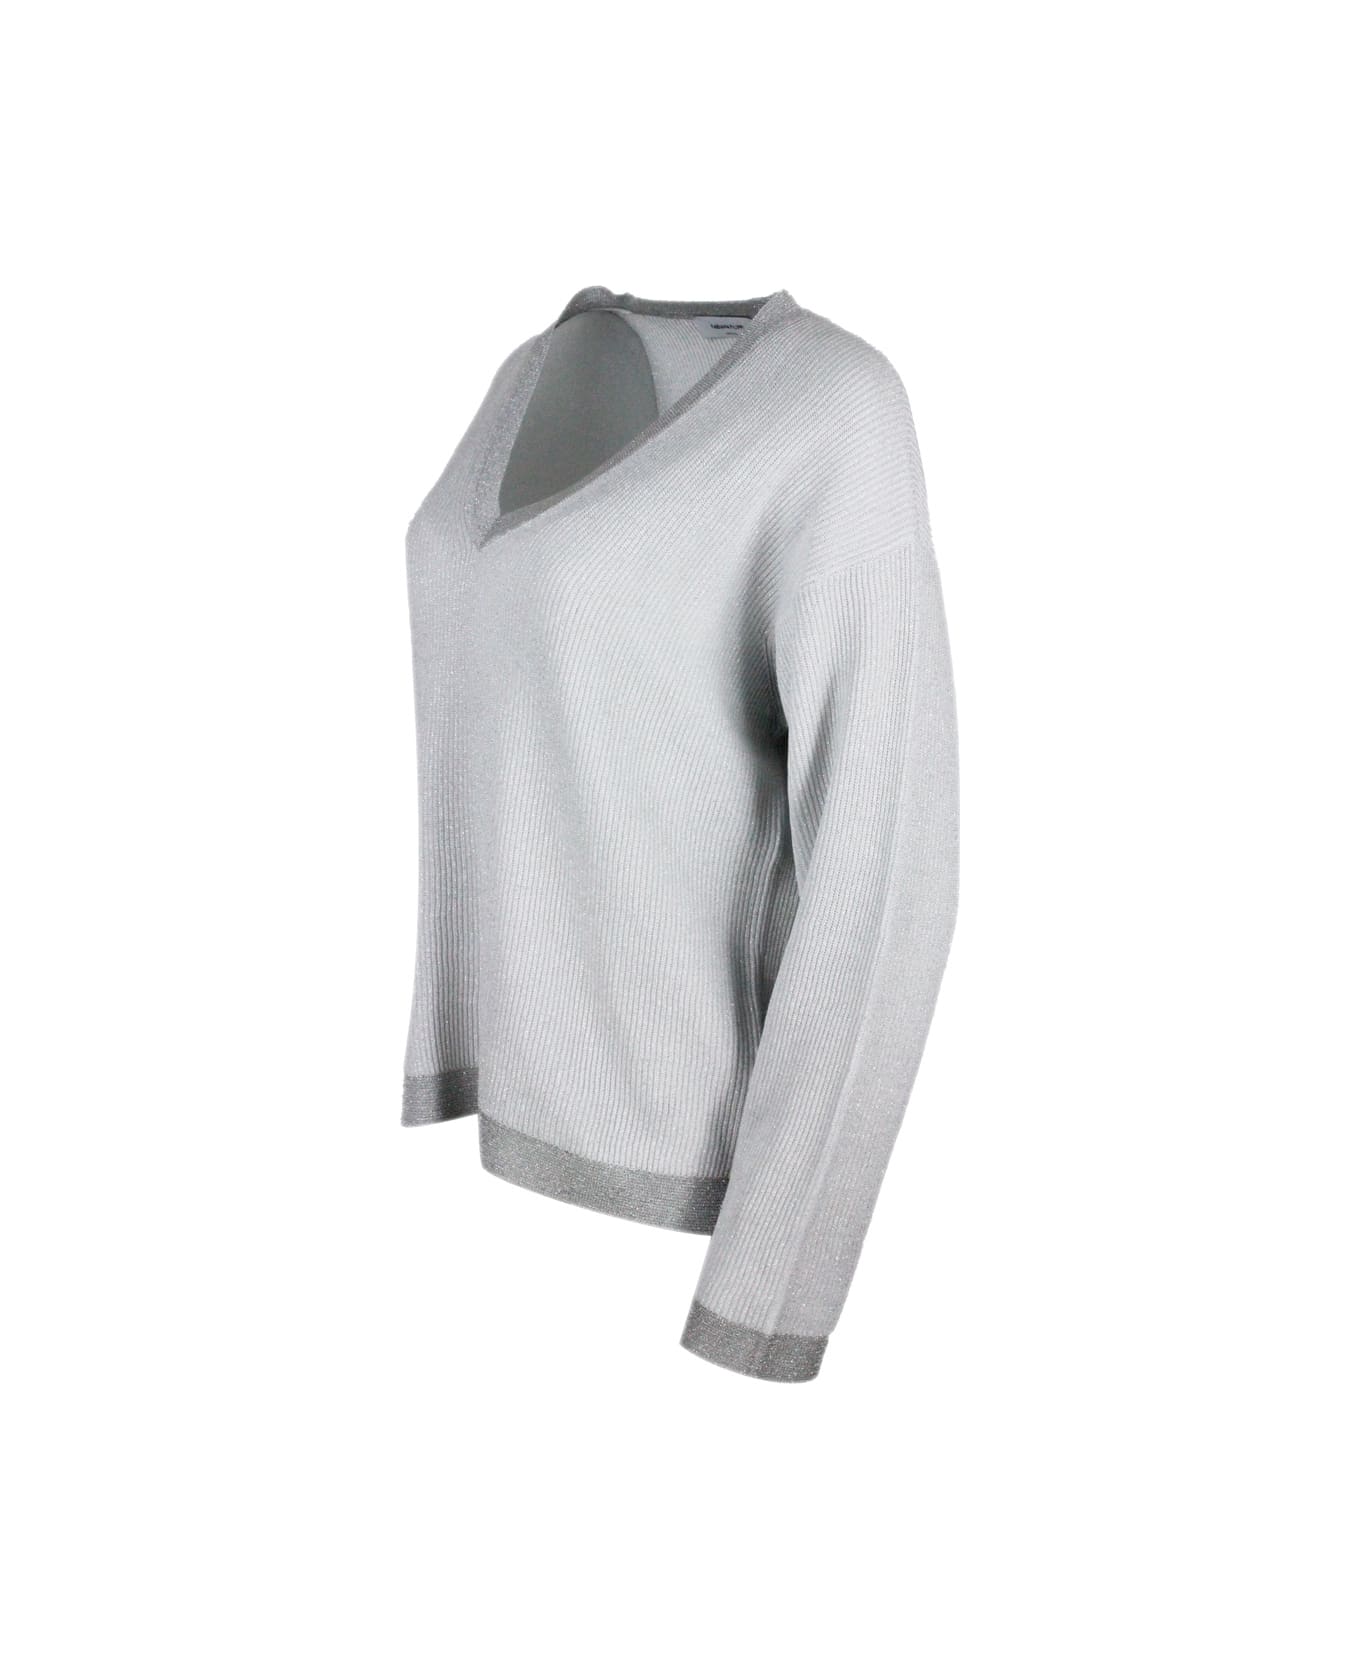 Fabiana Filippi V-neck Cotton Blend Sweater Embellished With Lurex Rows With Contrasting Color Edges - Ice